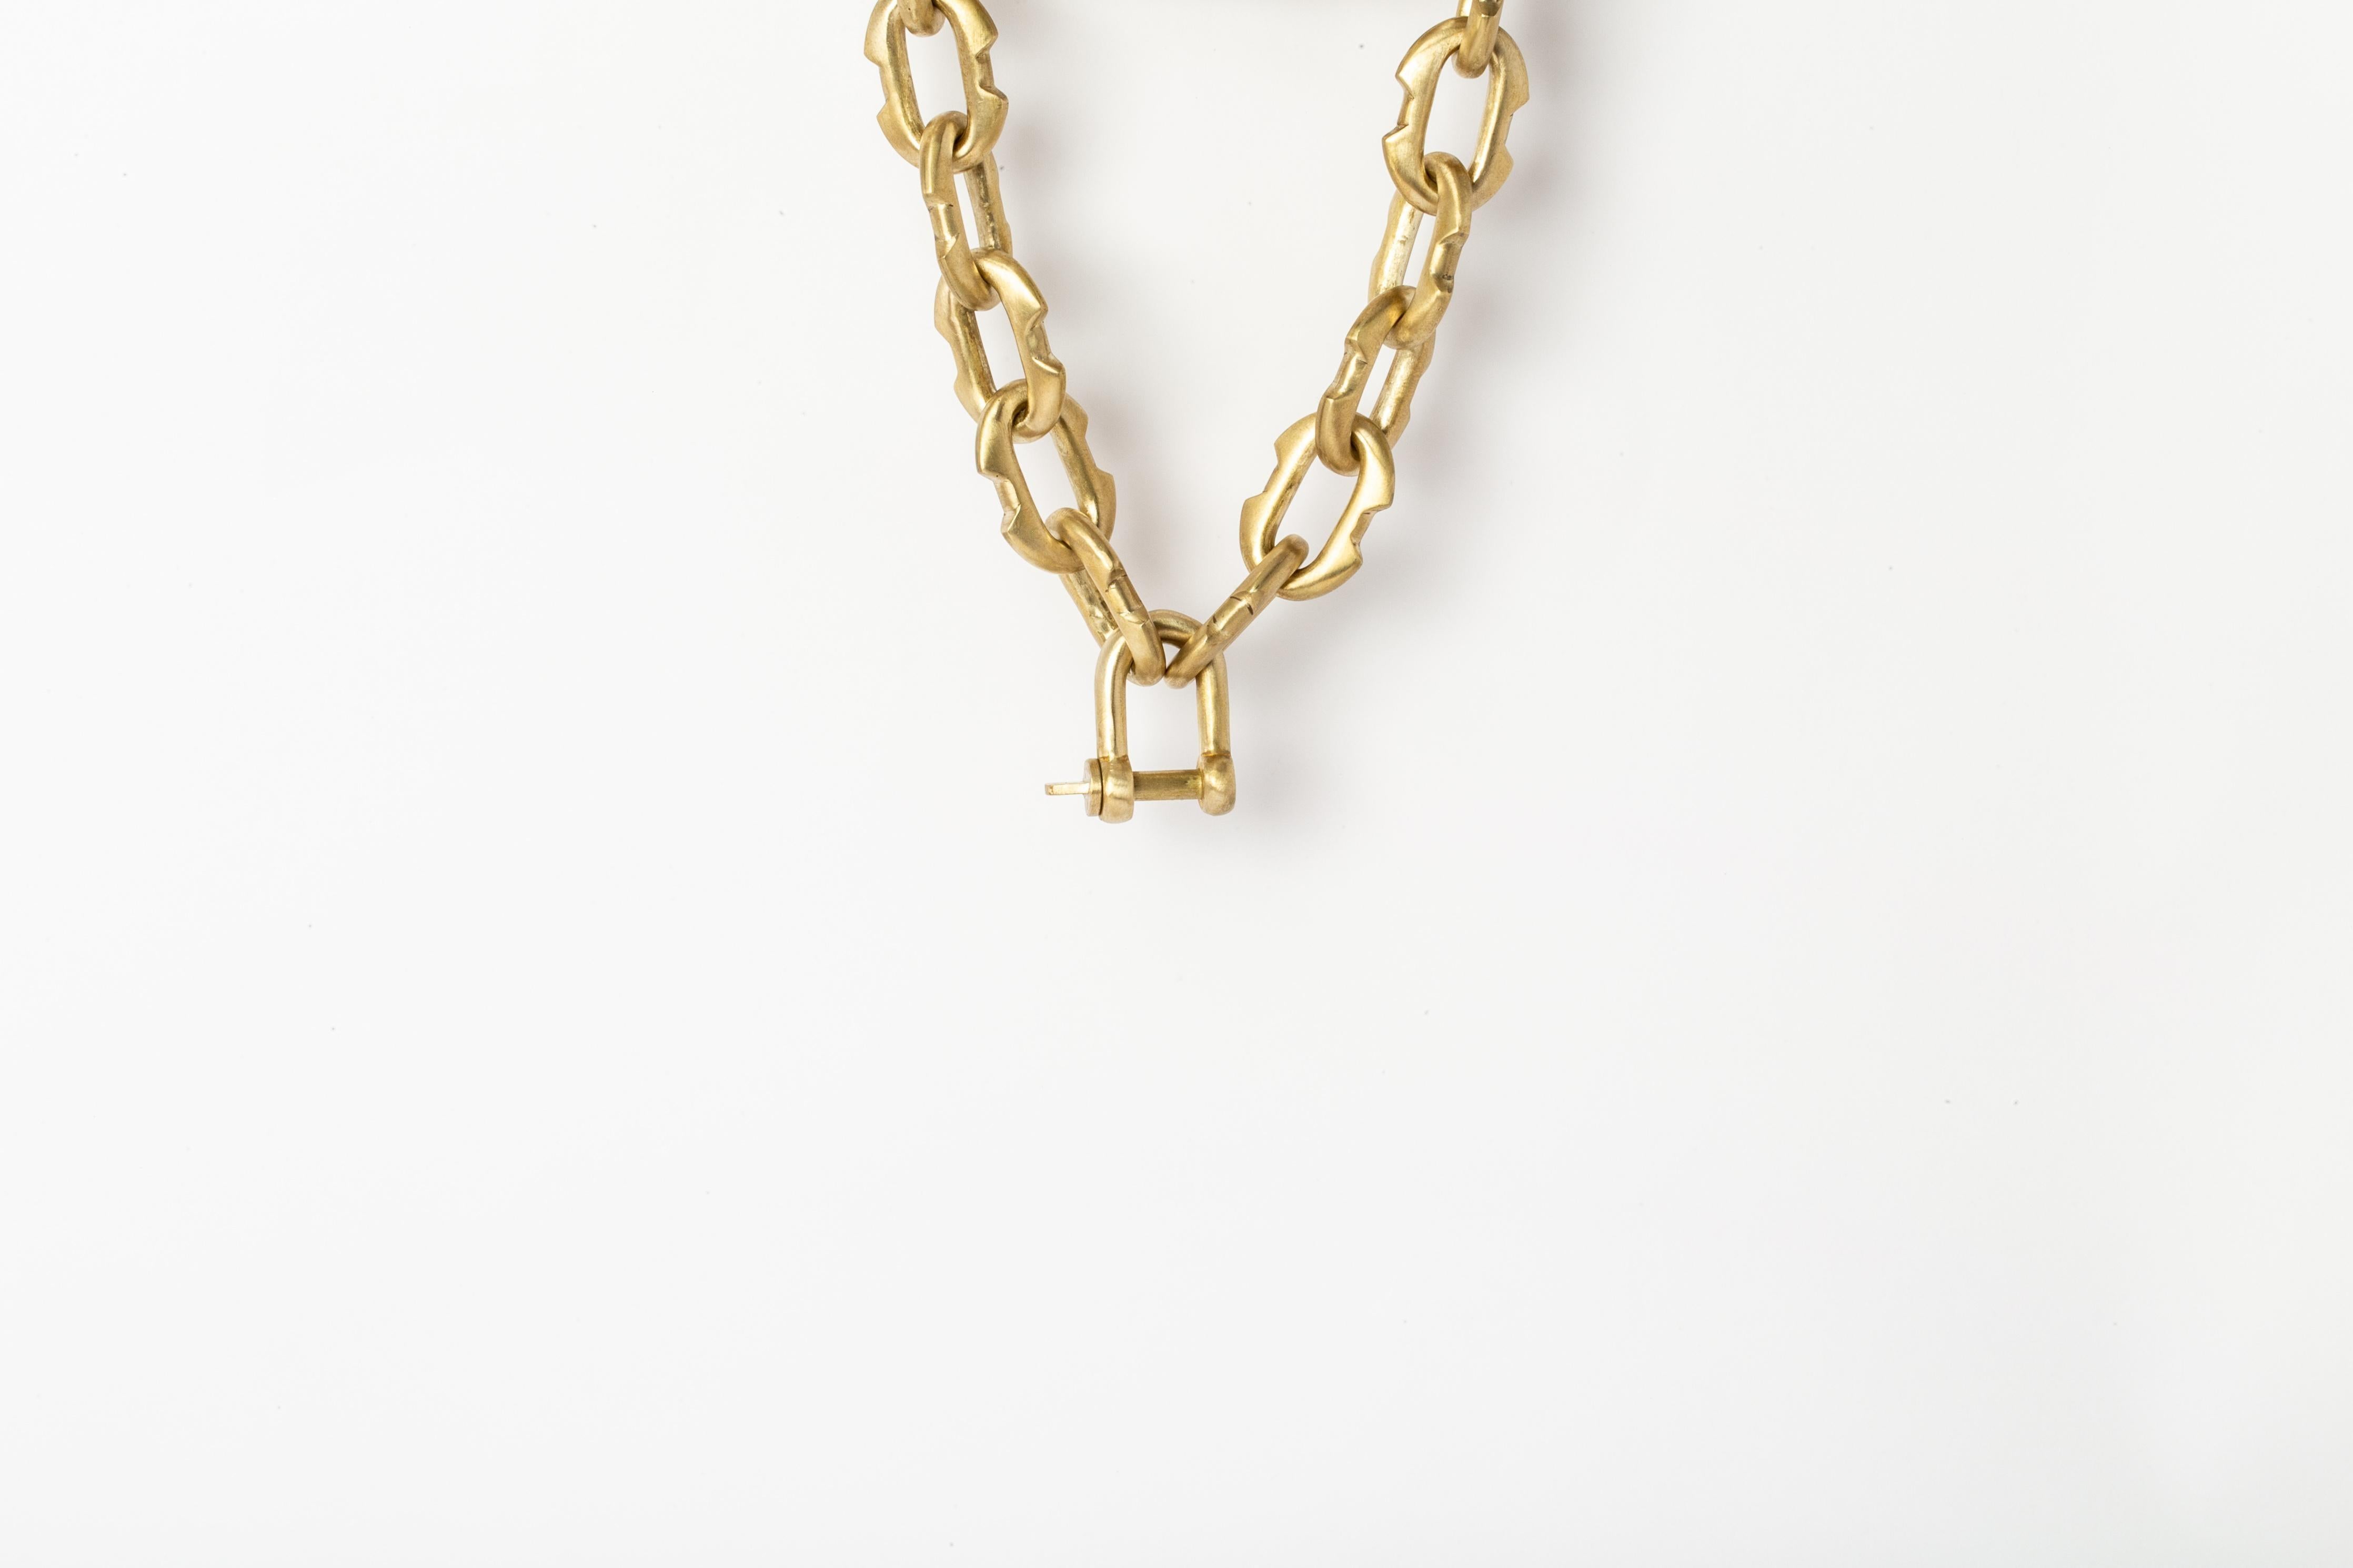 Charm Chain Choker (40cm, Small Deco Links, MR) In New Condition For Sale In Hong Kong, Hong Kong Island